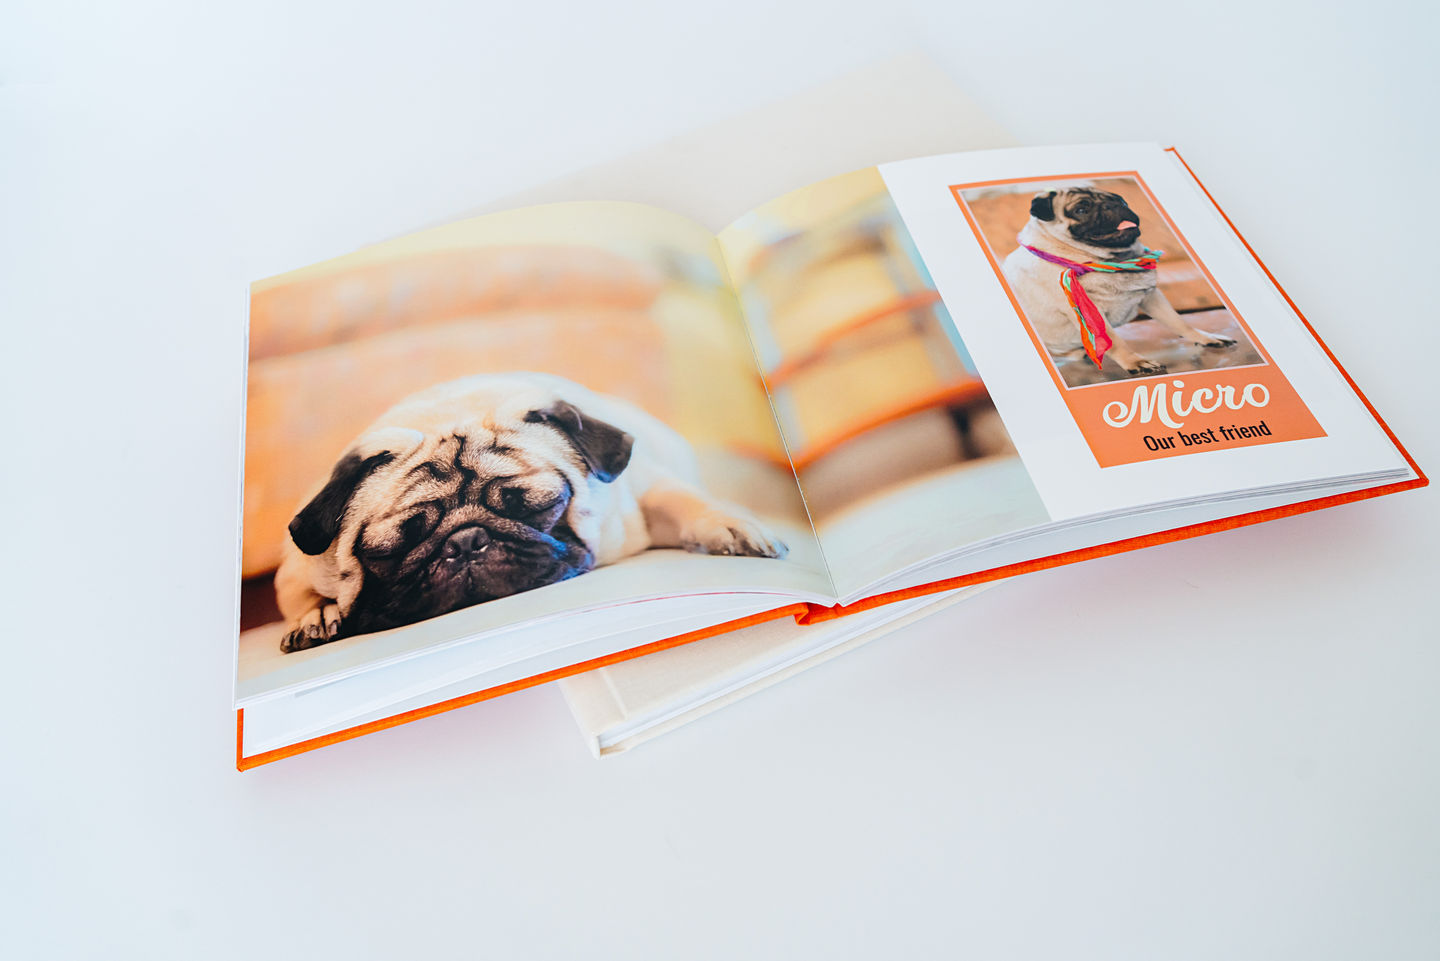 An open everyday photo book with image of dogs